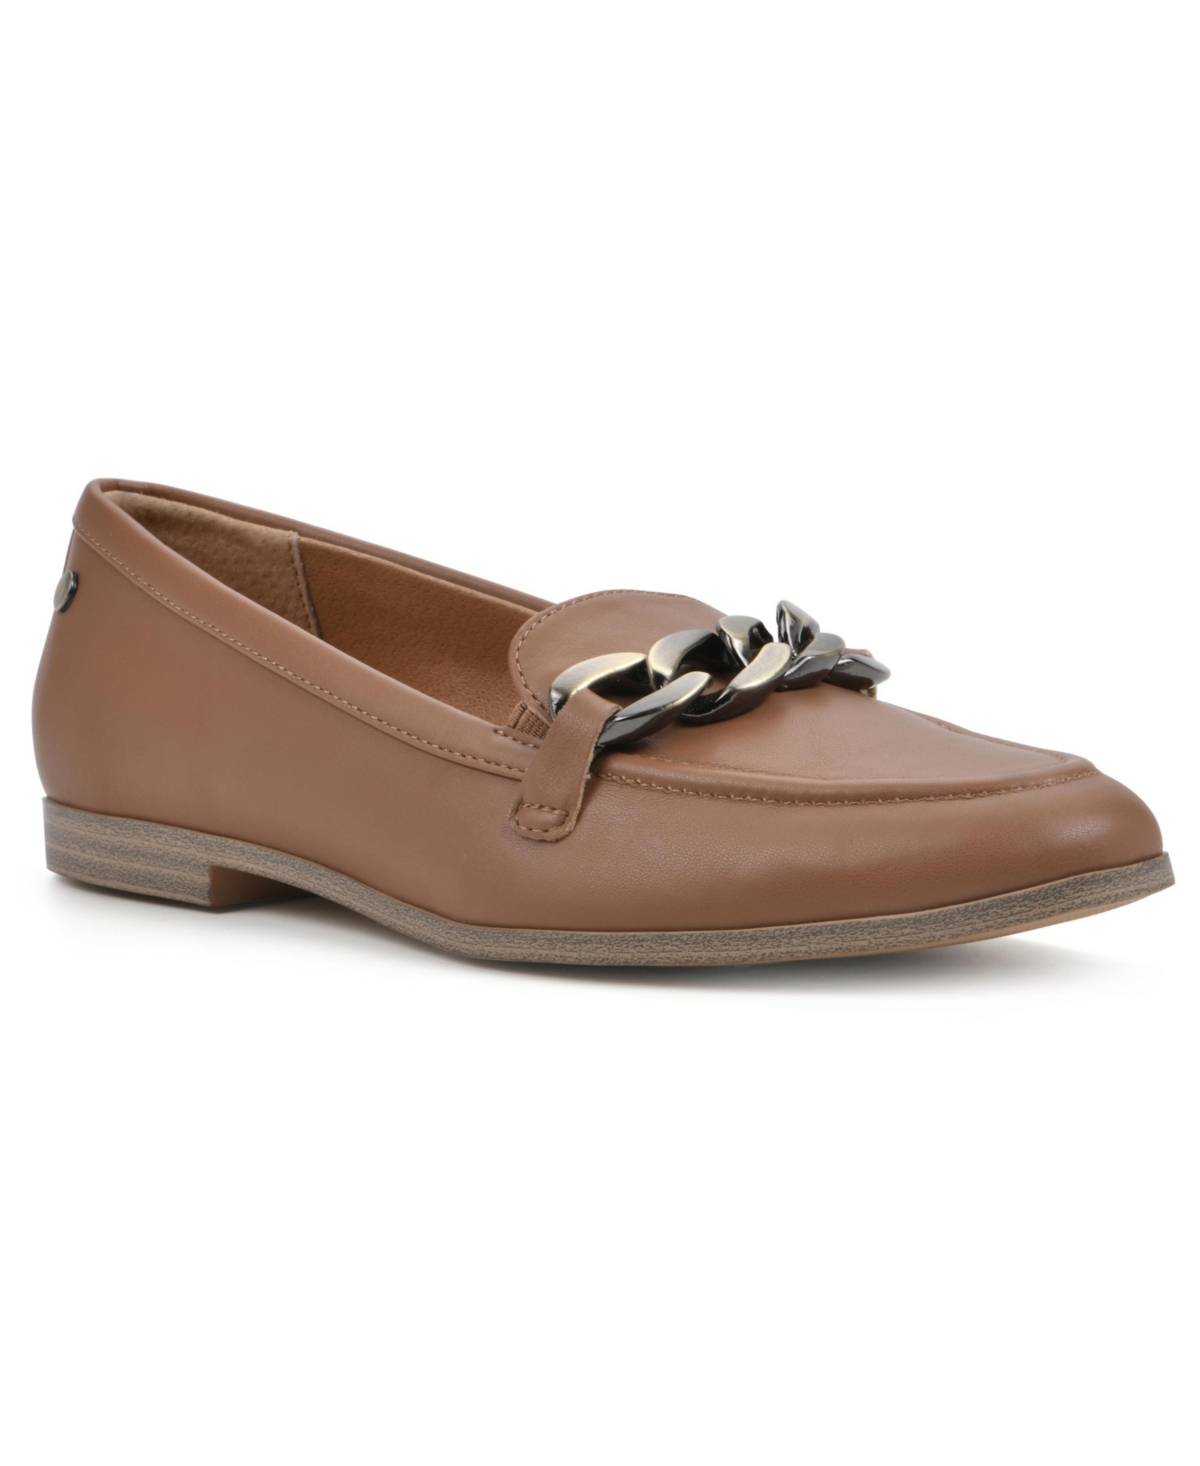 Women's Nobles Chain Detail Loafers - Tan Smooth